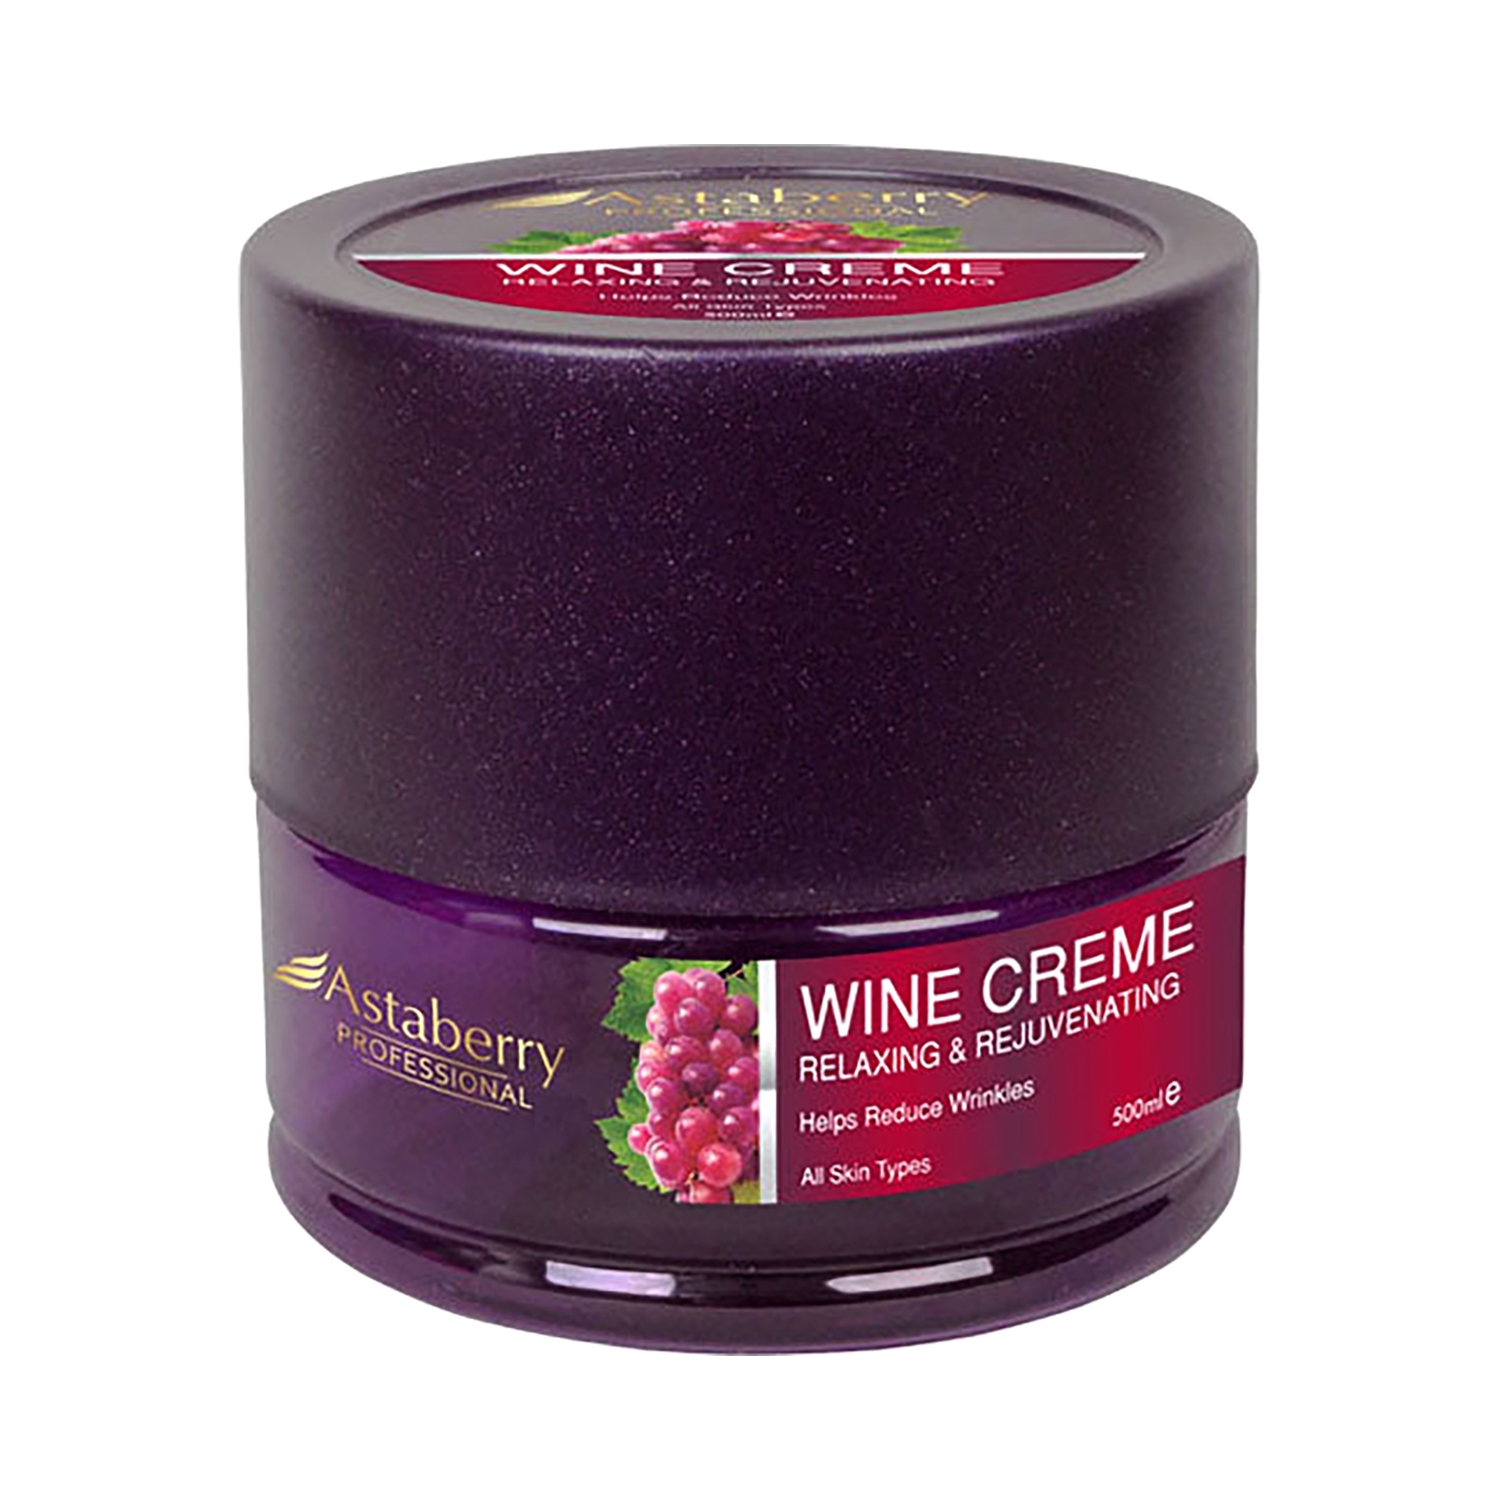 Astaberry | Astaberry Professional Wine Creme (500ml)